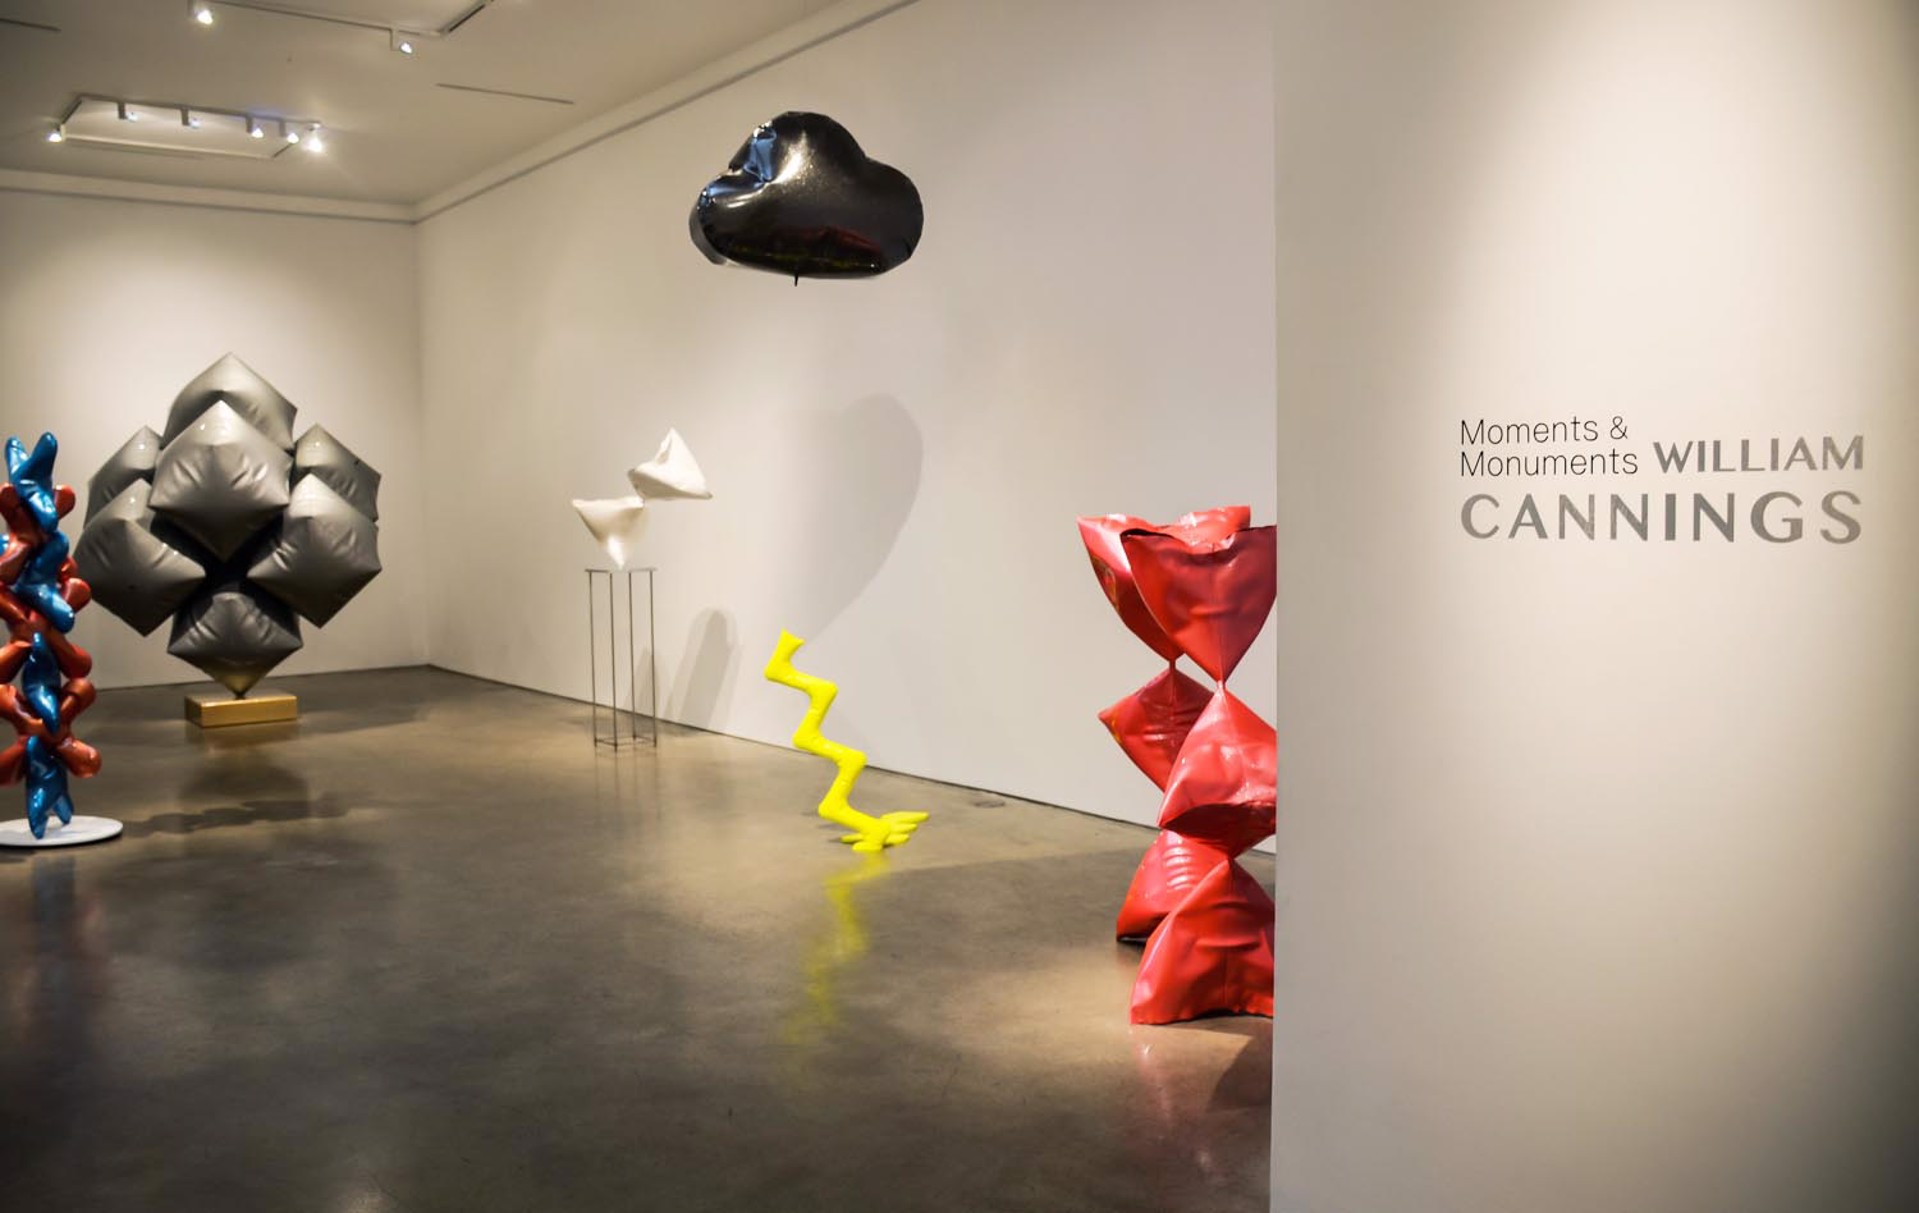 Installation view "Moments & Monuments" by William Cannings